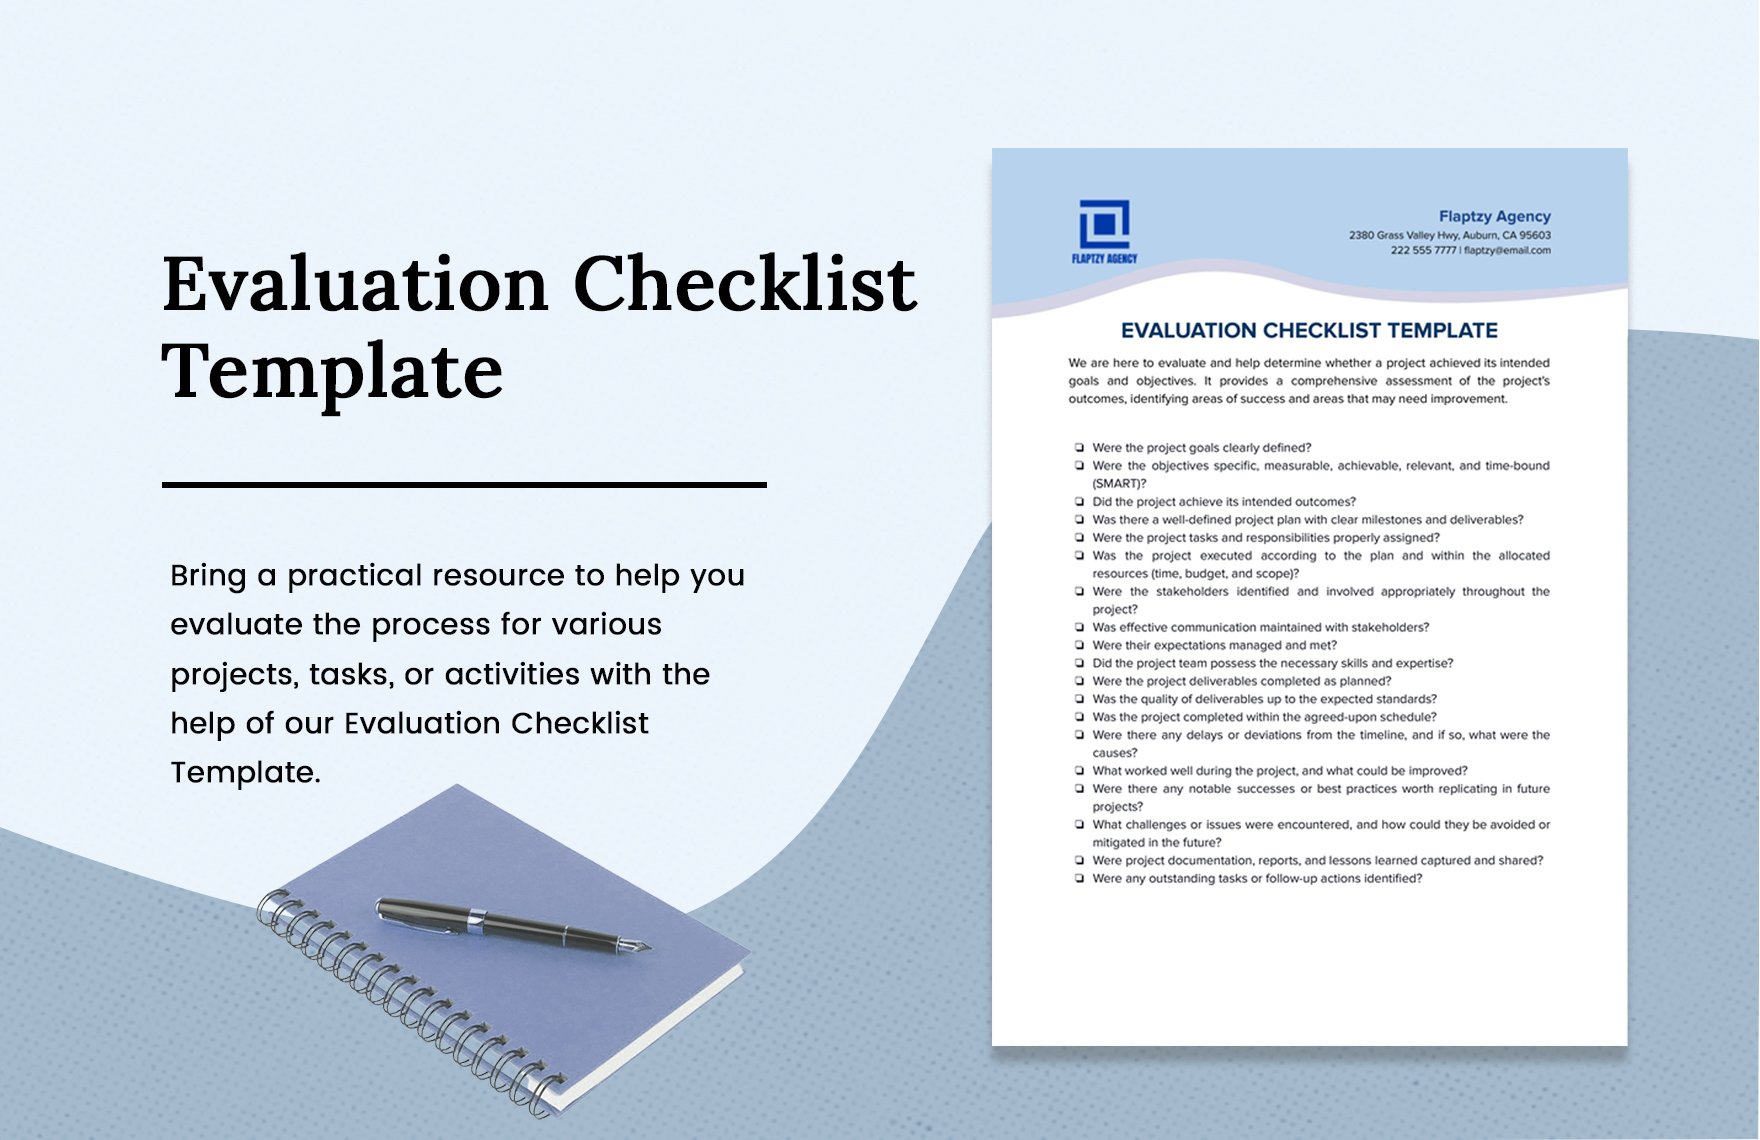 Free Evaluation Checklist Template in Word, Google Docs, PDF